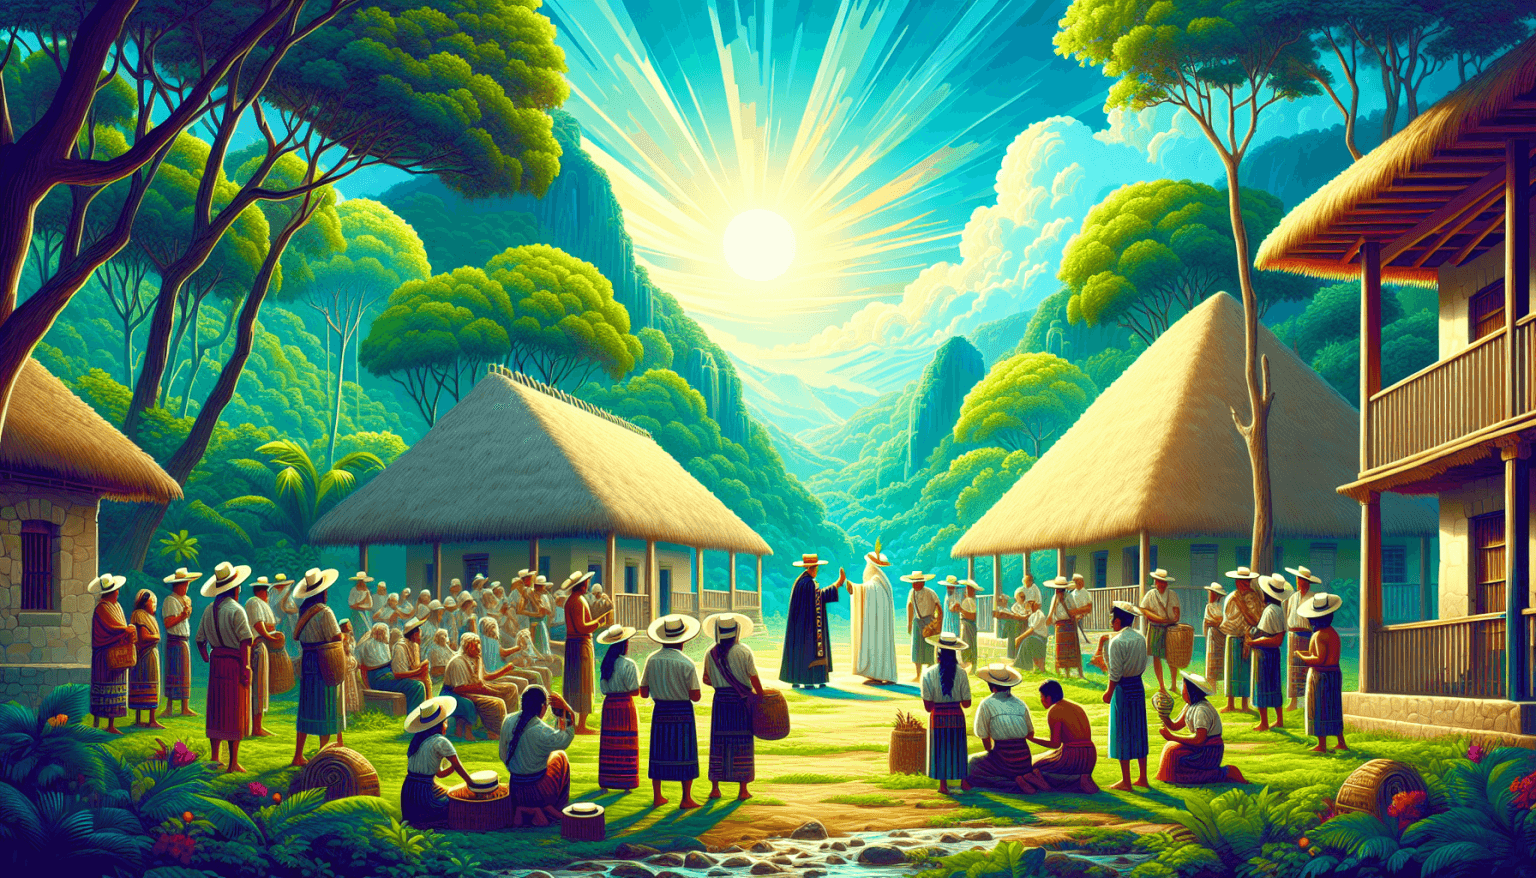 Digital artwork depicting a serene scene of early Spanish missionaries introducing Christianity to indigenous Maya communities in Guatemala, with a lush, vibrant jungle backdrop and traditional Maya a